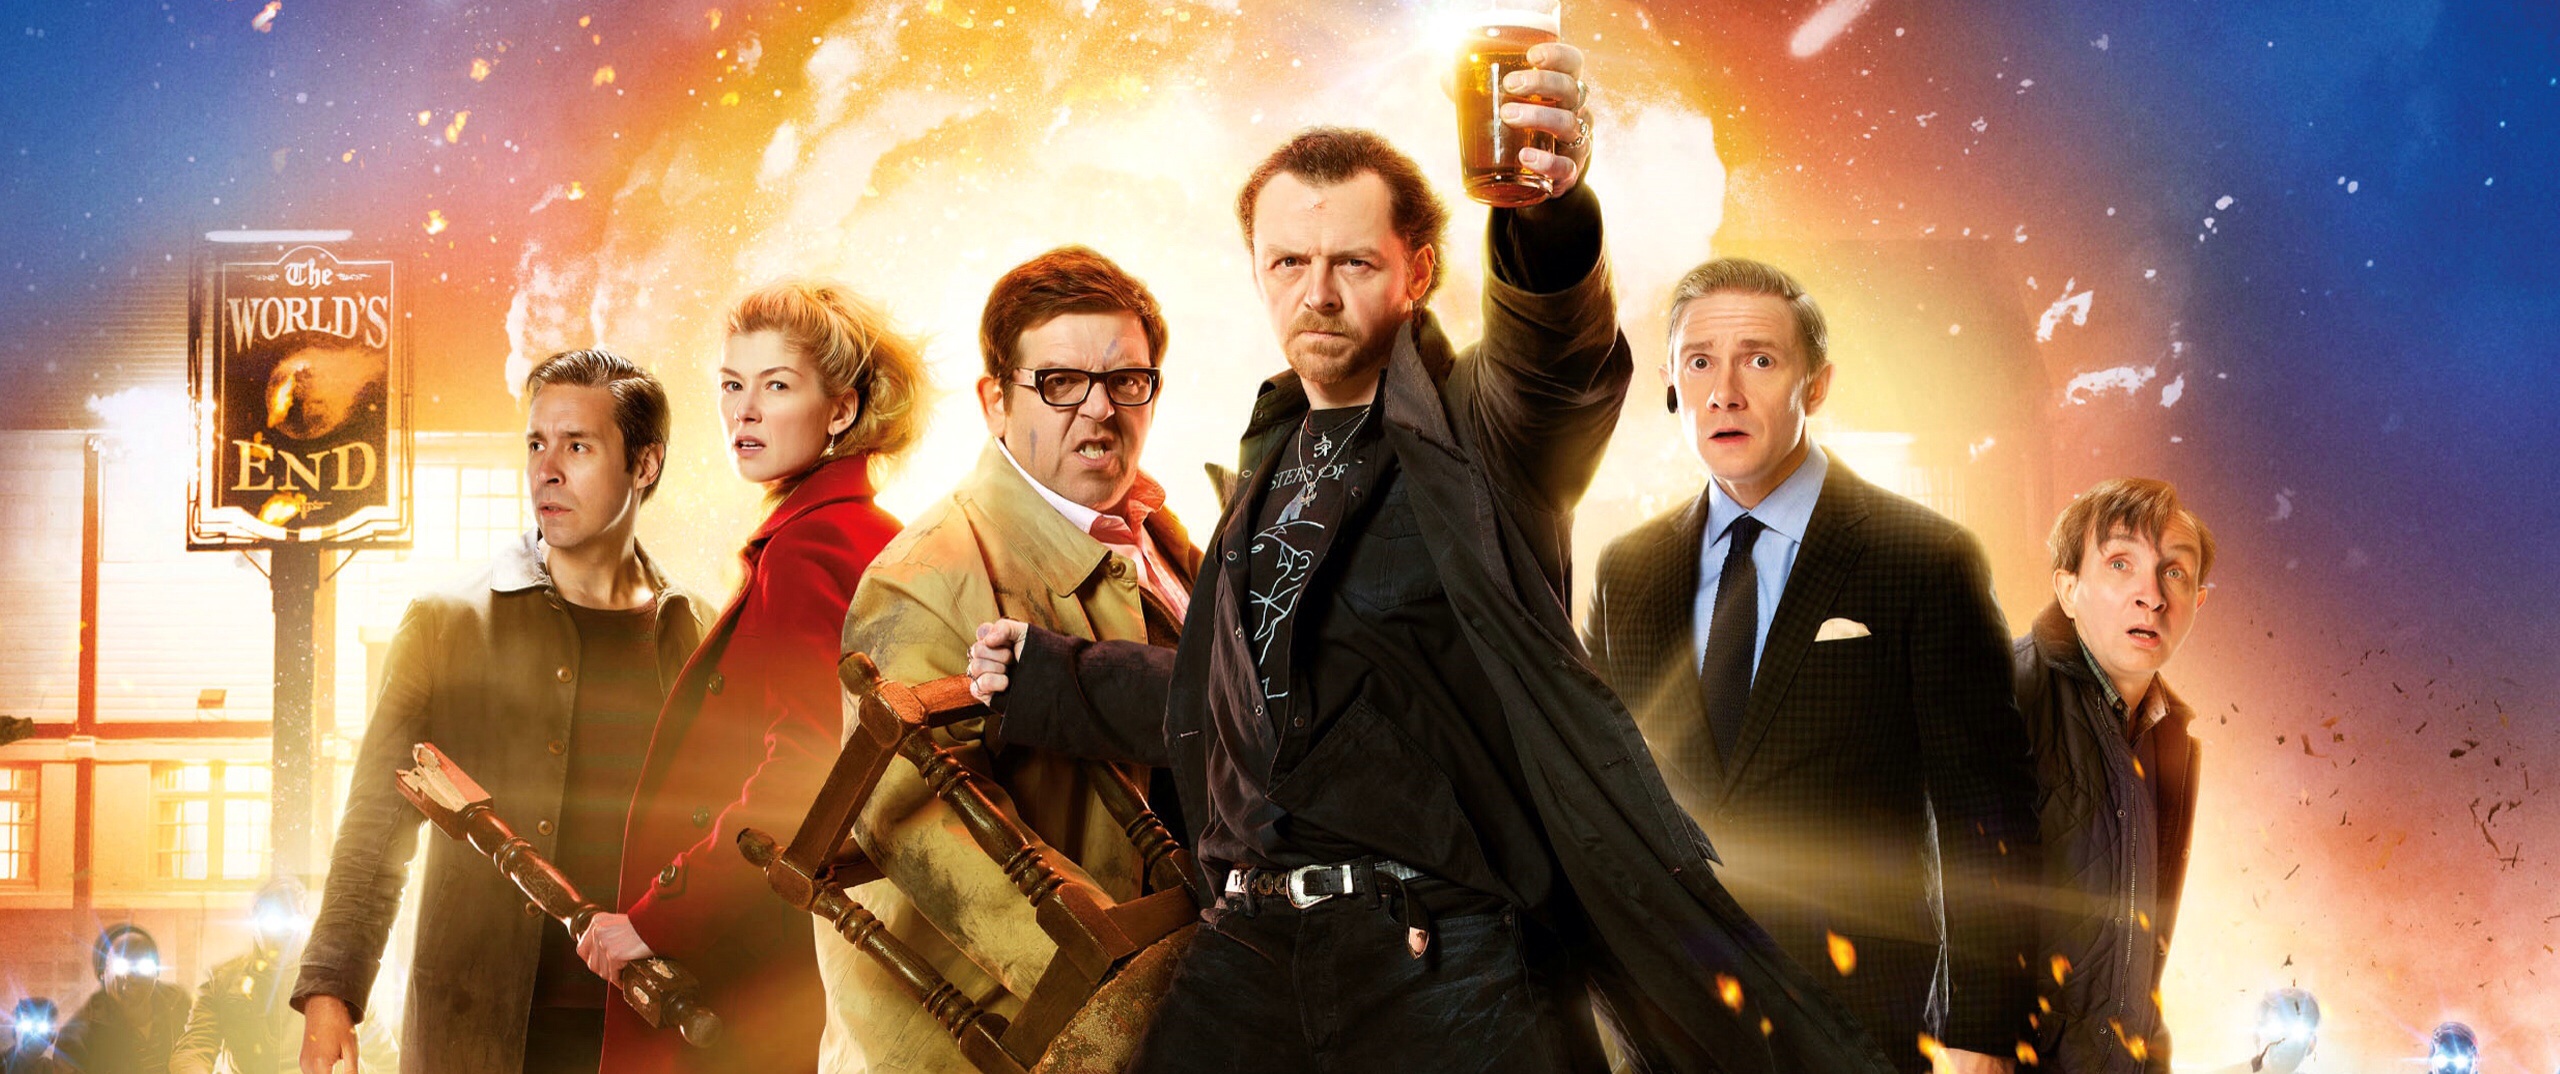 The World’s End Blu-Ray SteelBook will be pub crawling in November